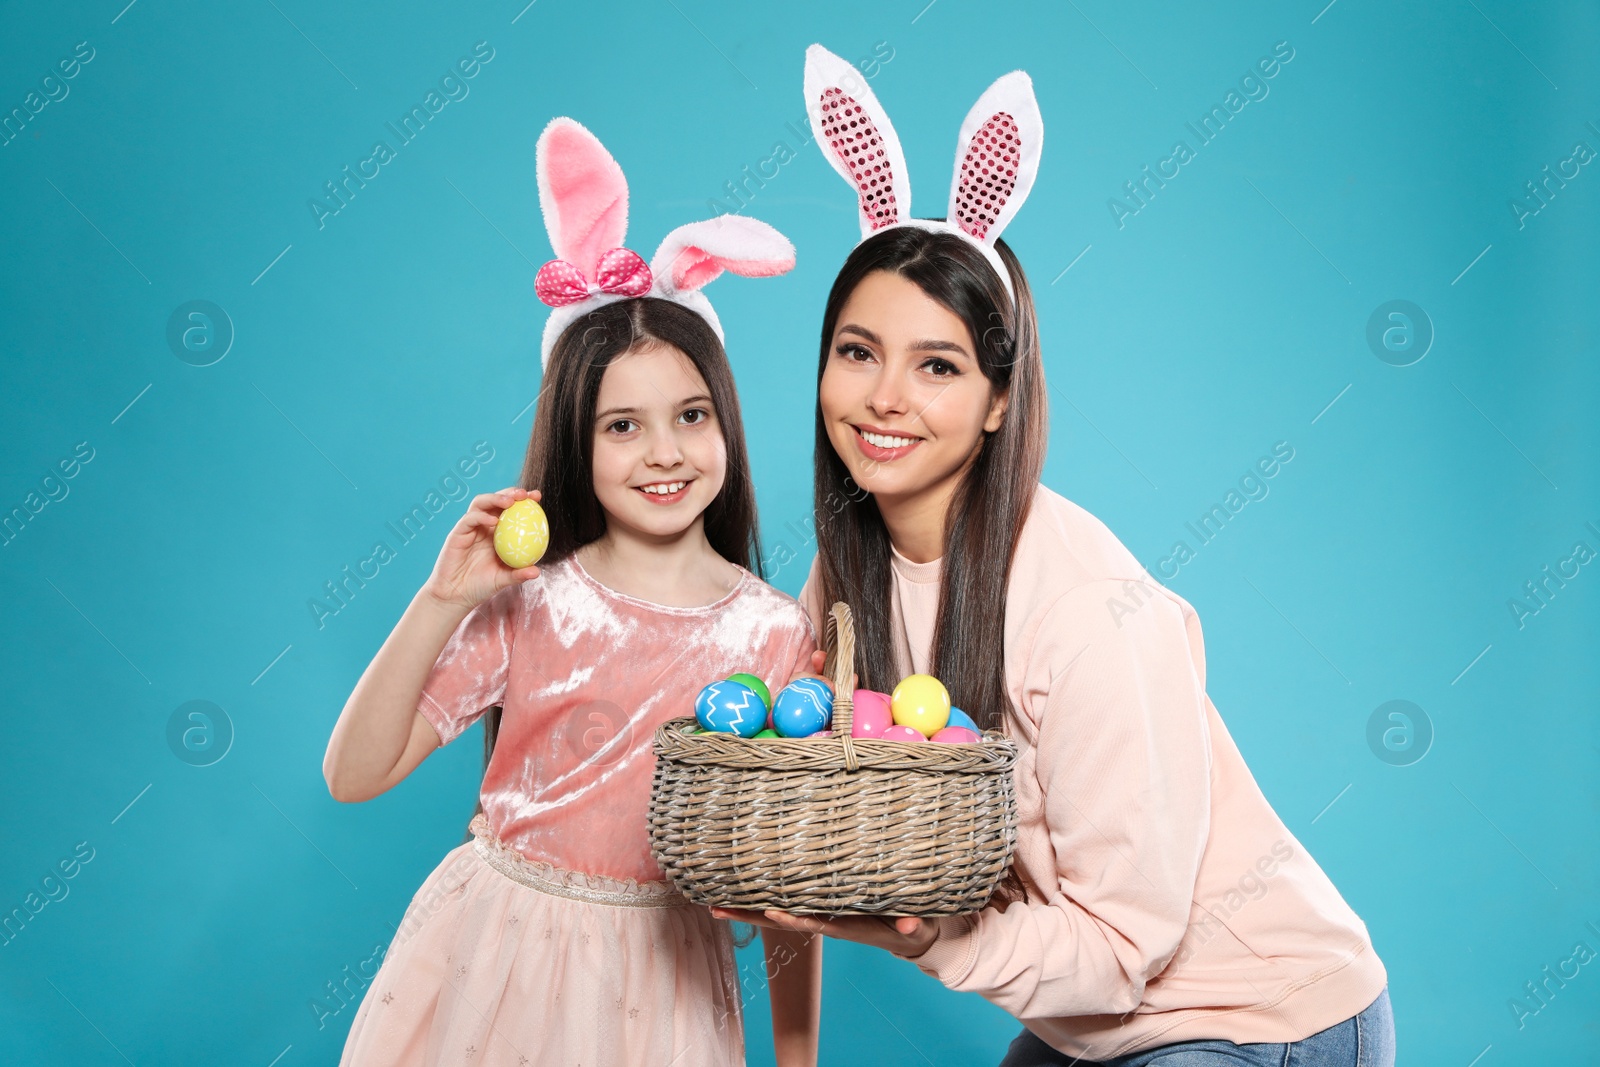 Photo of Mother and daughter in bunny ears headbands with basket of Easter eggs on color background